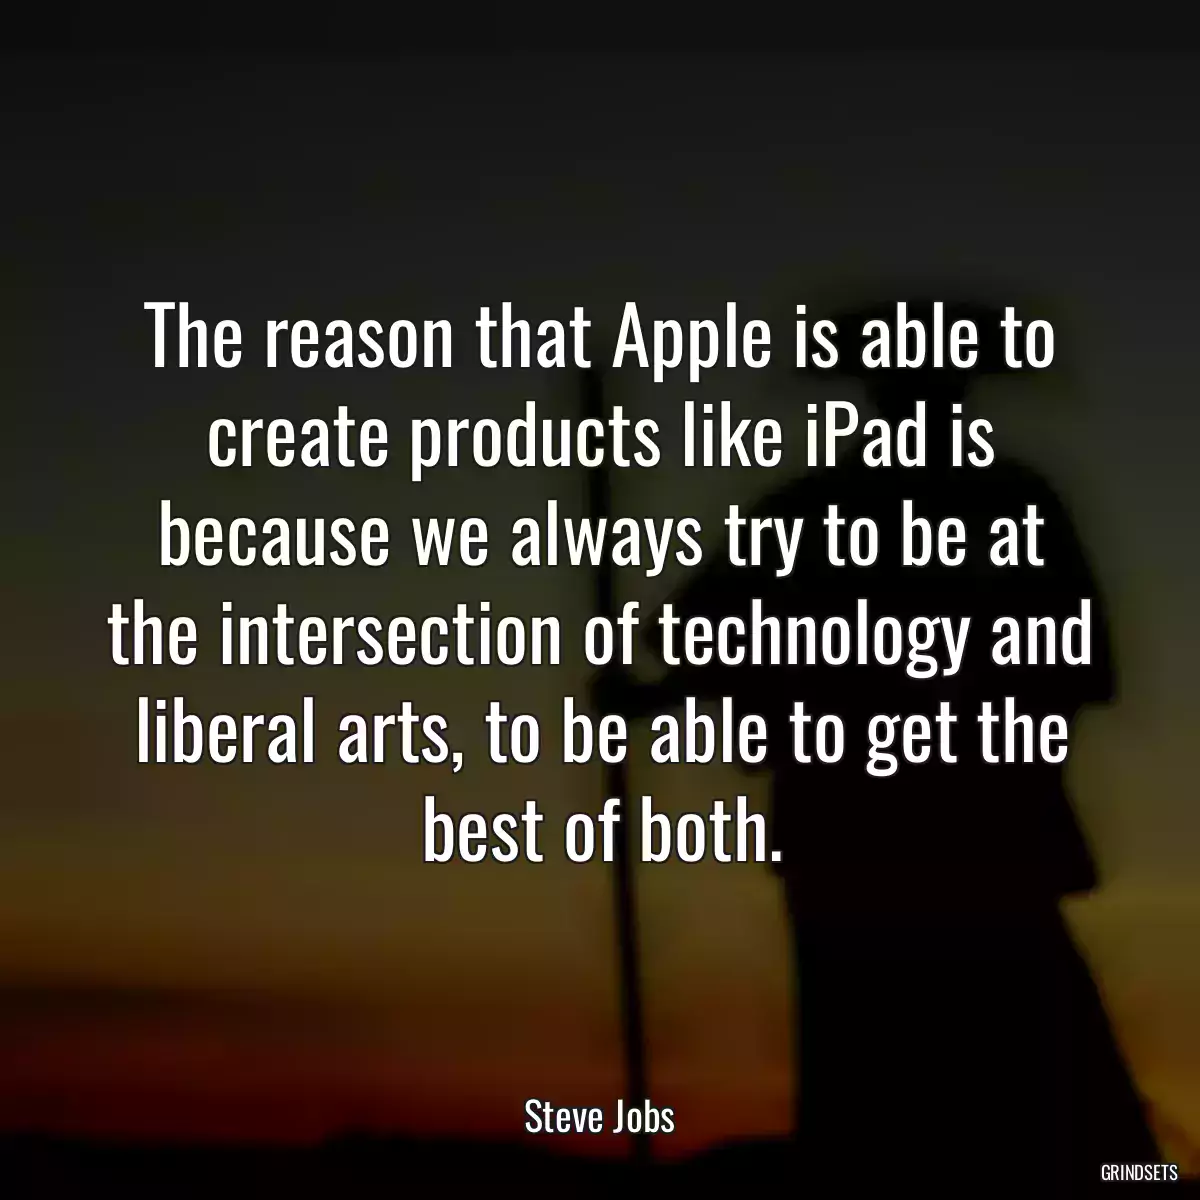 The reason that Apple is able to create products like iPad is because we always try to be at the intersection of technology and liberal arts, to be able to get the best of both.